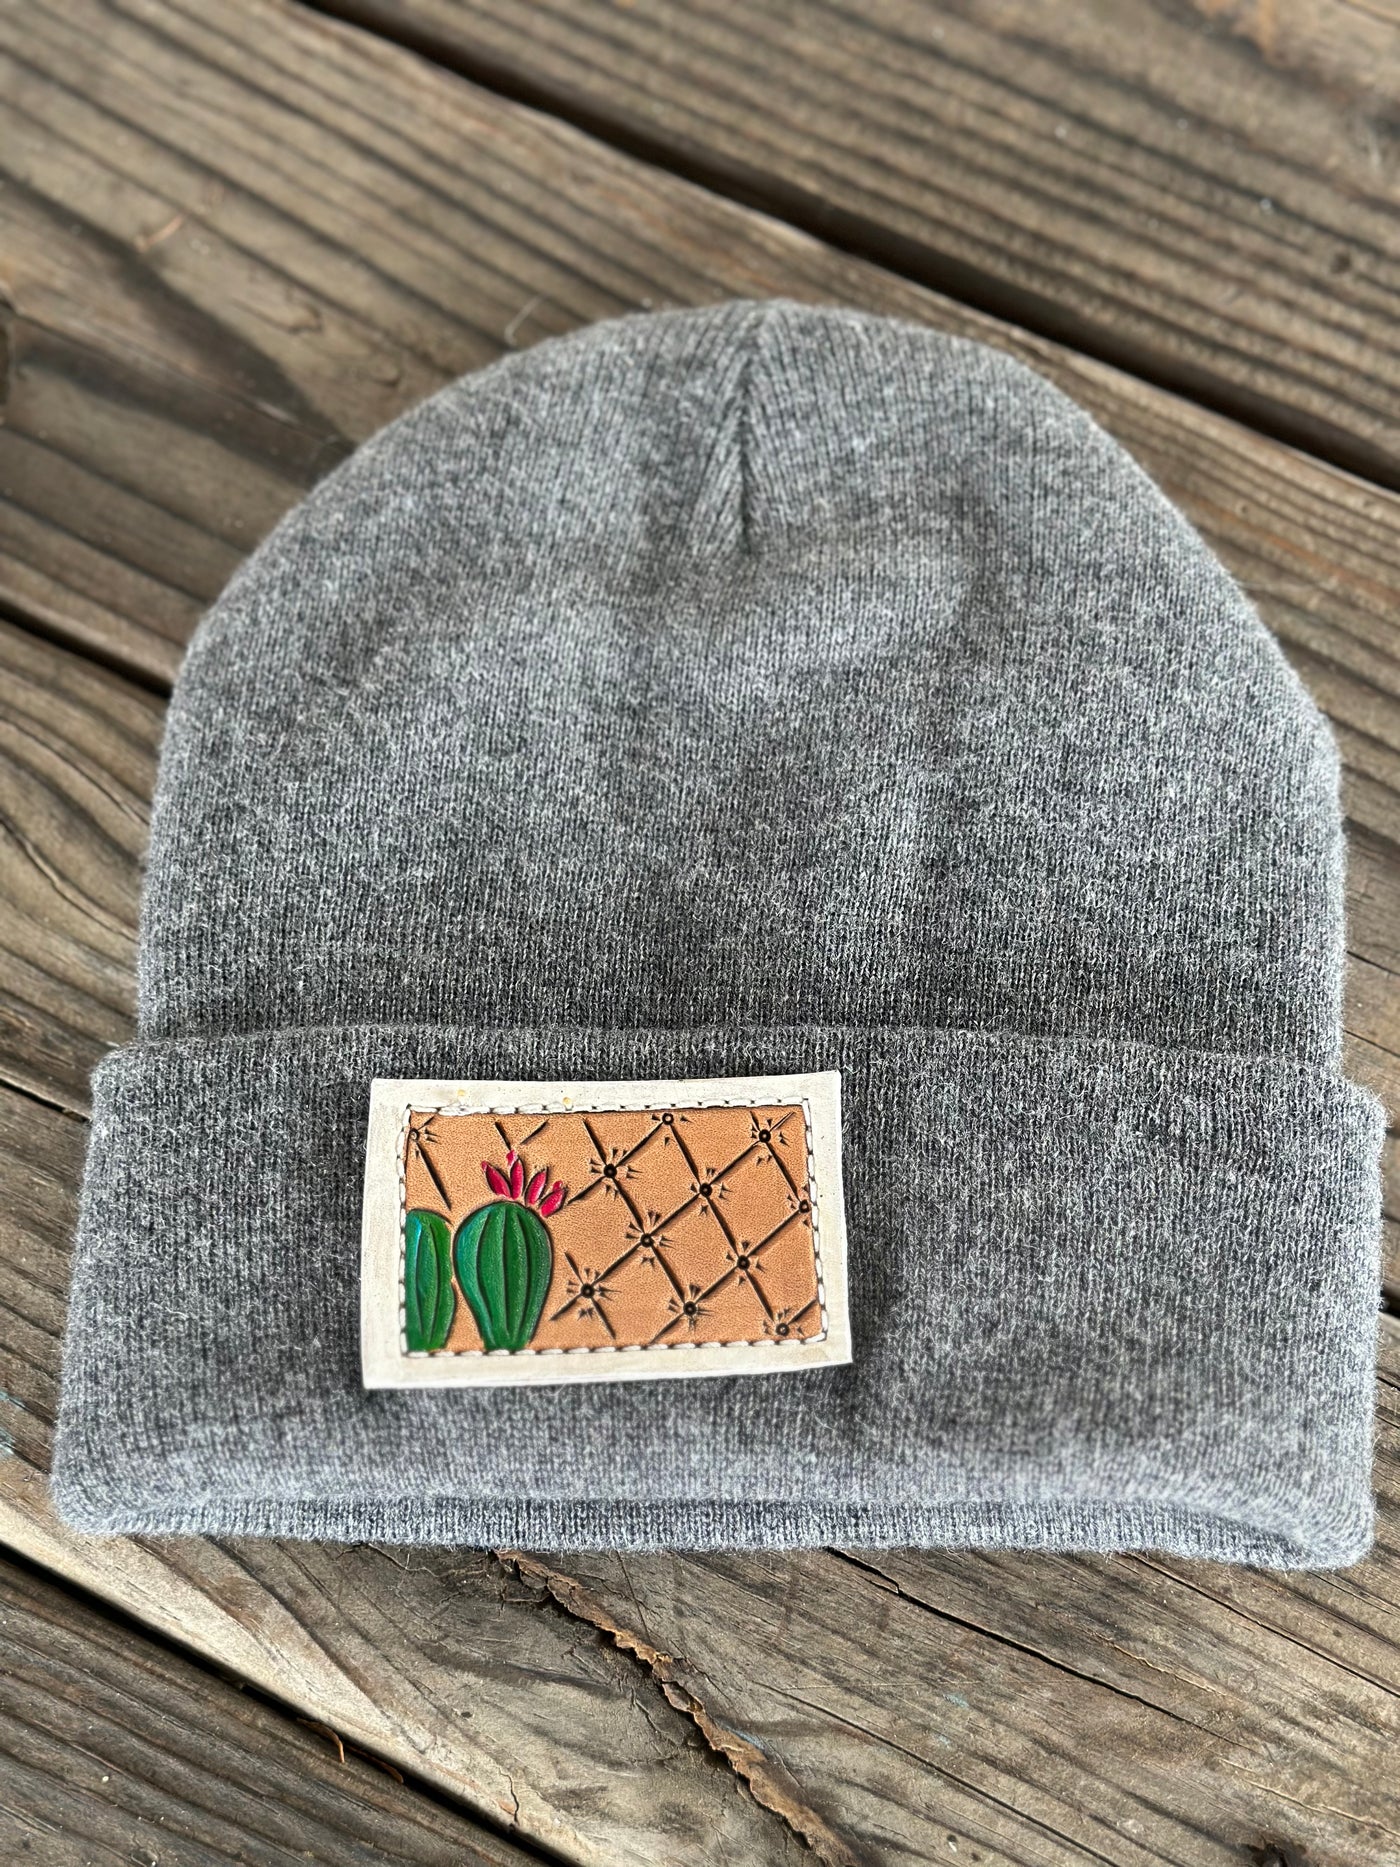 Tooled Leather Beanies